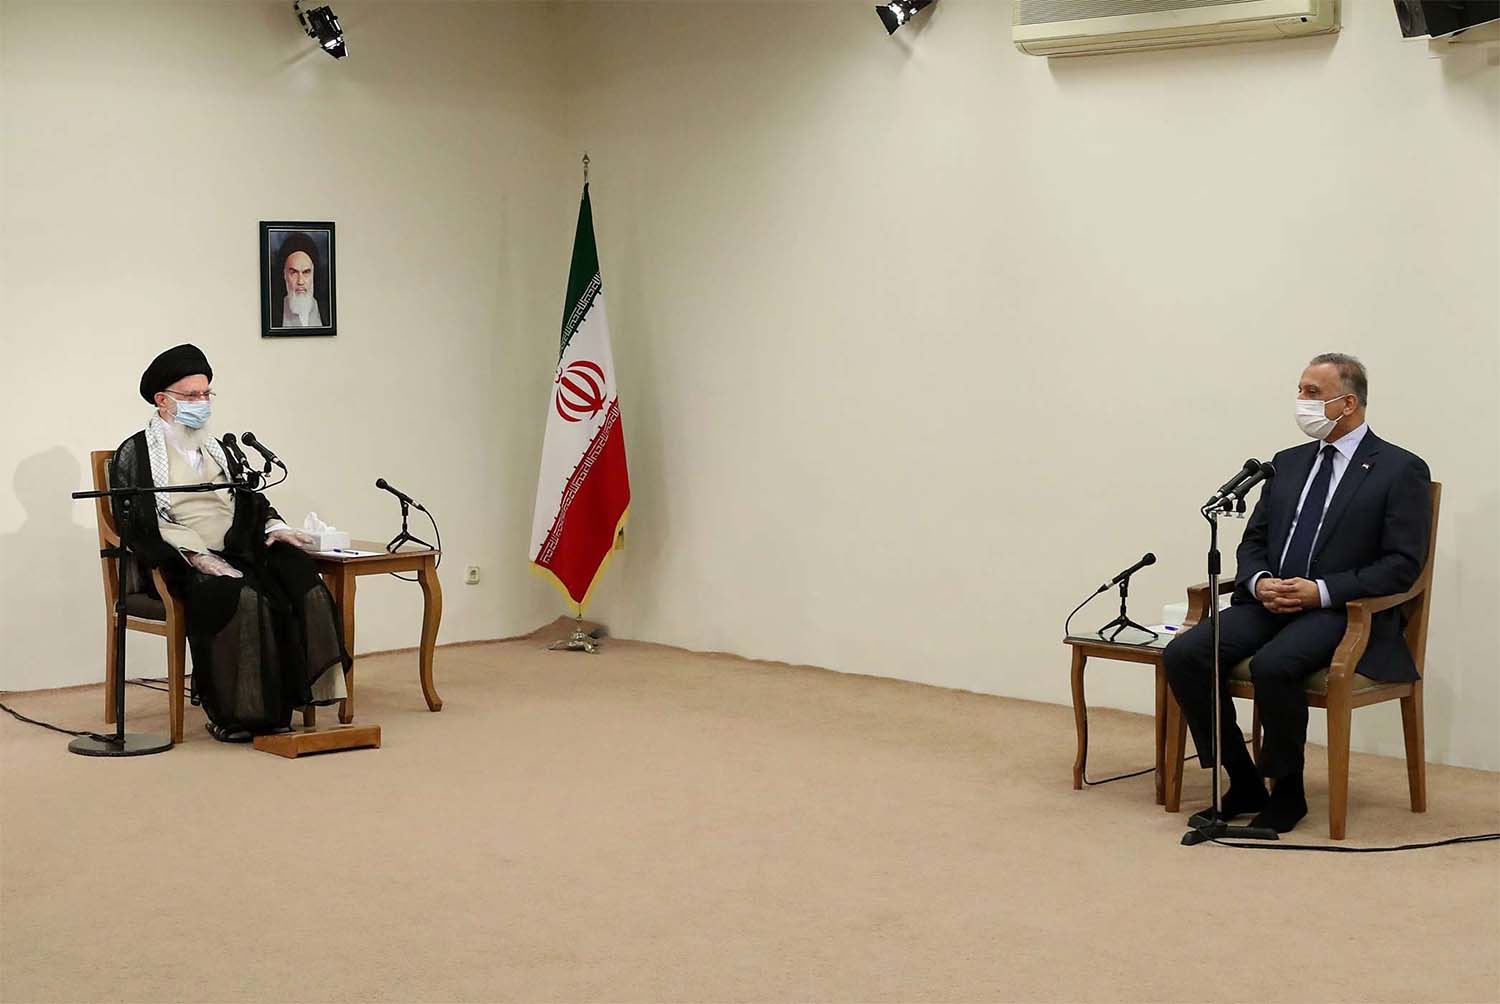 Khamenei said Iran would not interfere in relations between Iraq and the United States